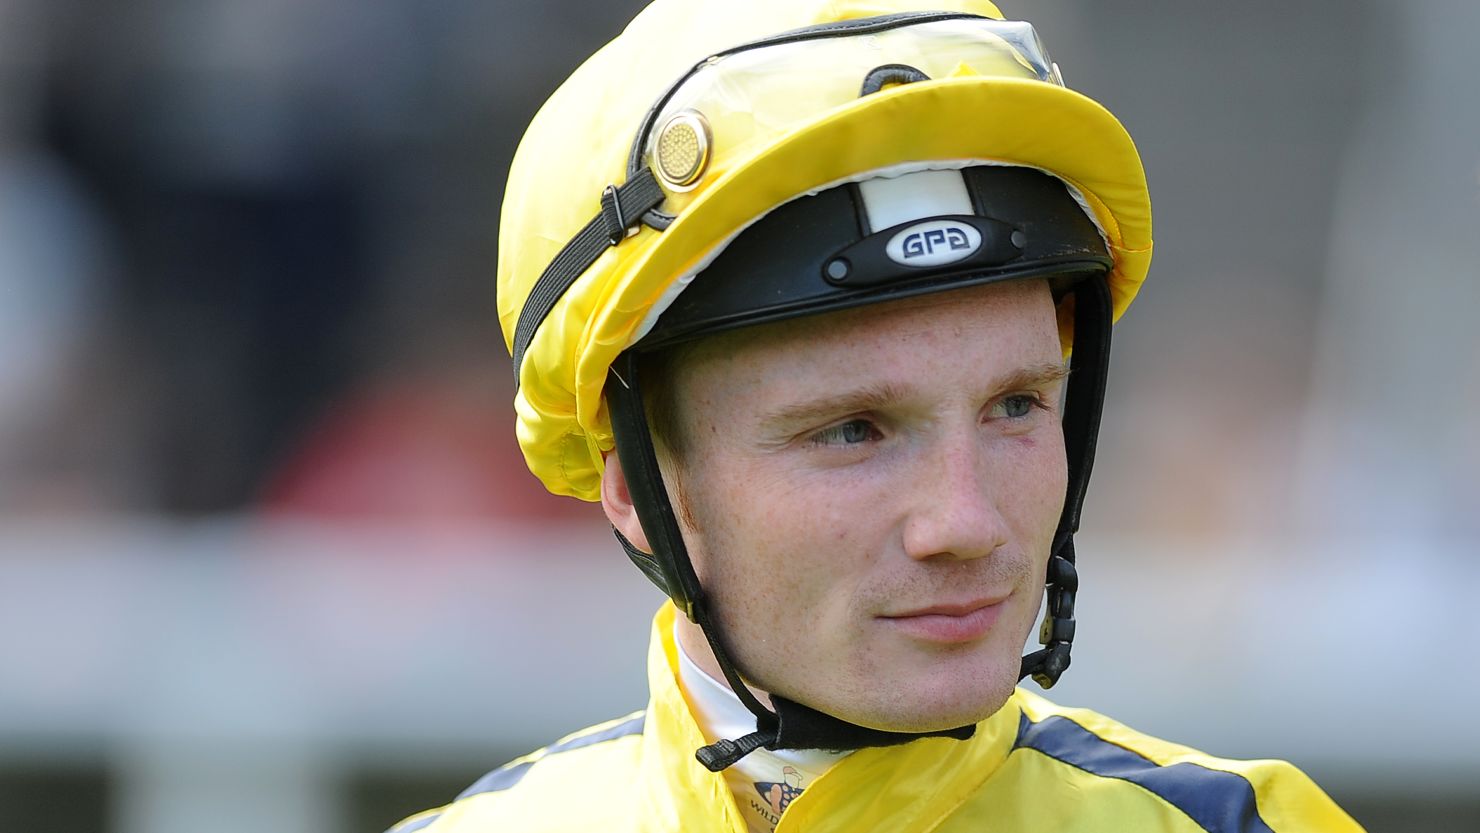 Freddy Tylicki suffered a T7 paralysis after a sickening fall at Kempton last Monday.